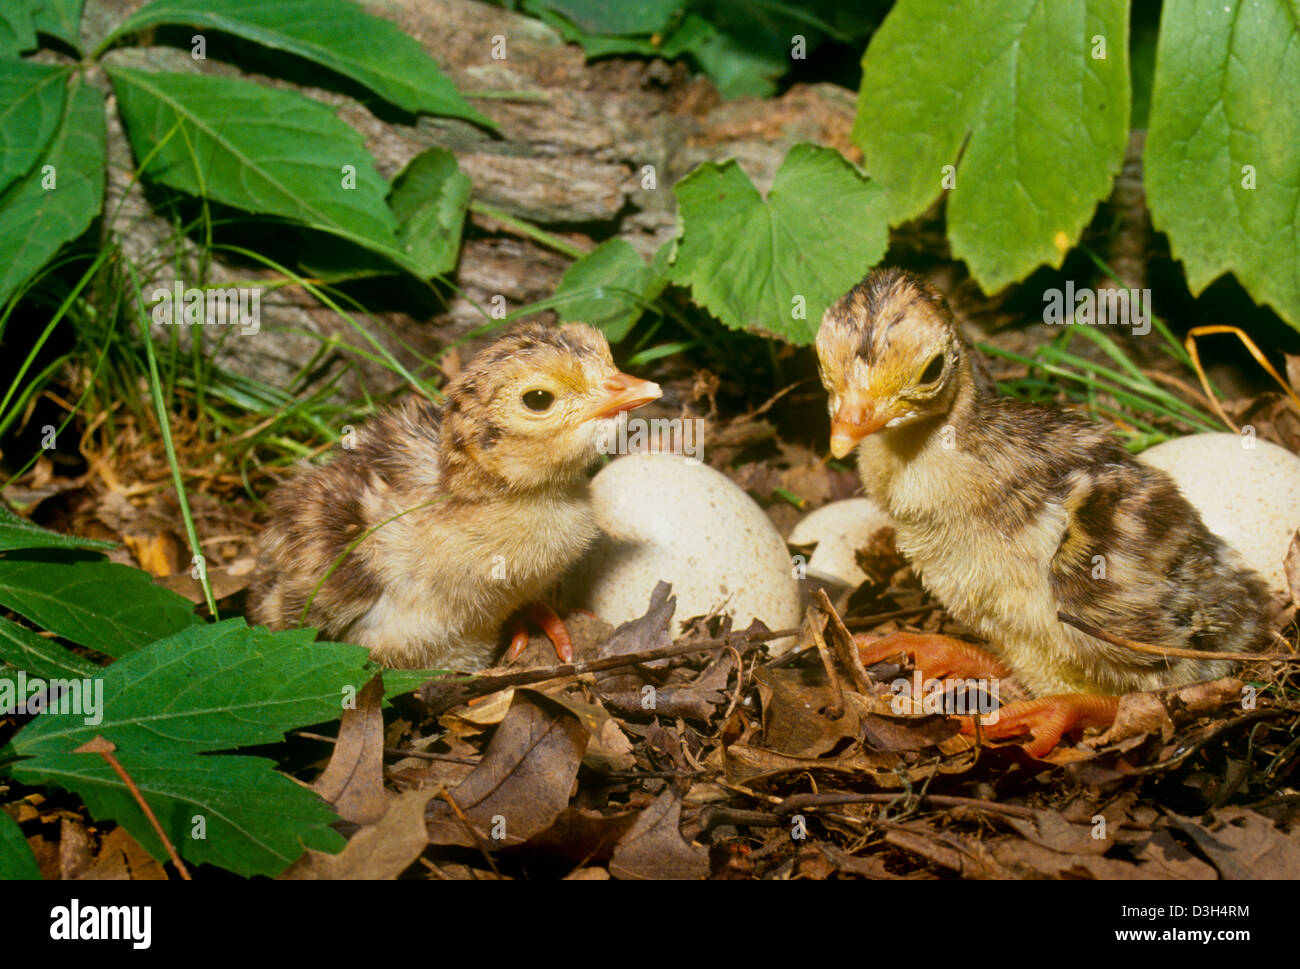 Two newly hatched wild baby turkeys (poults) in summer garden hiding among the flowers Stock Photo